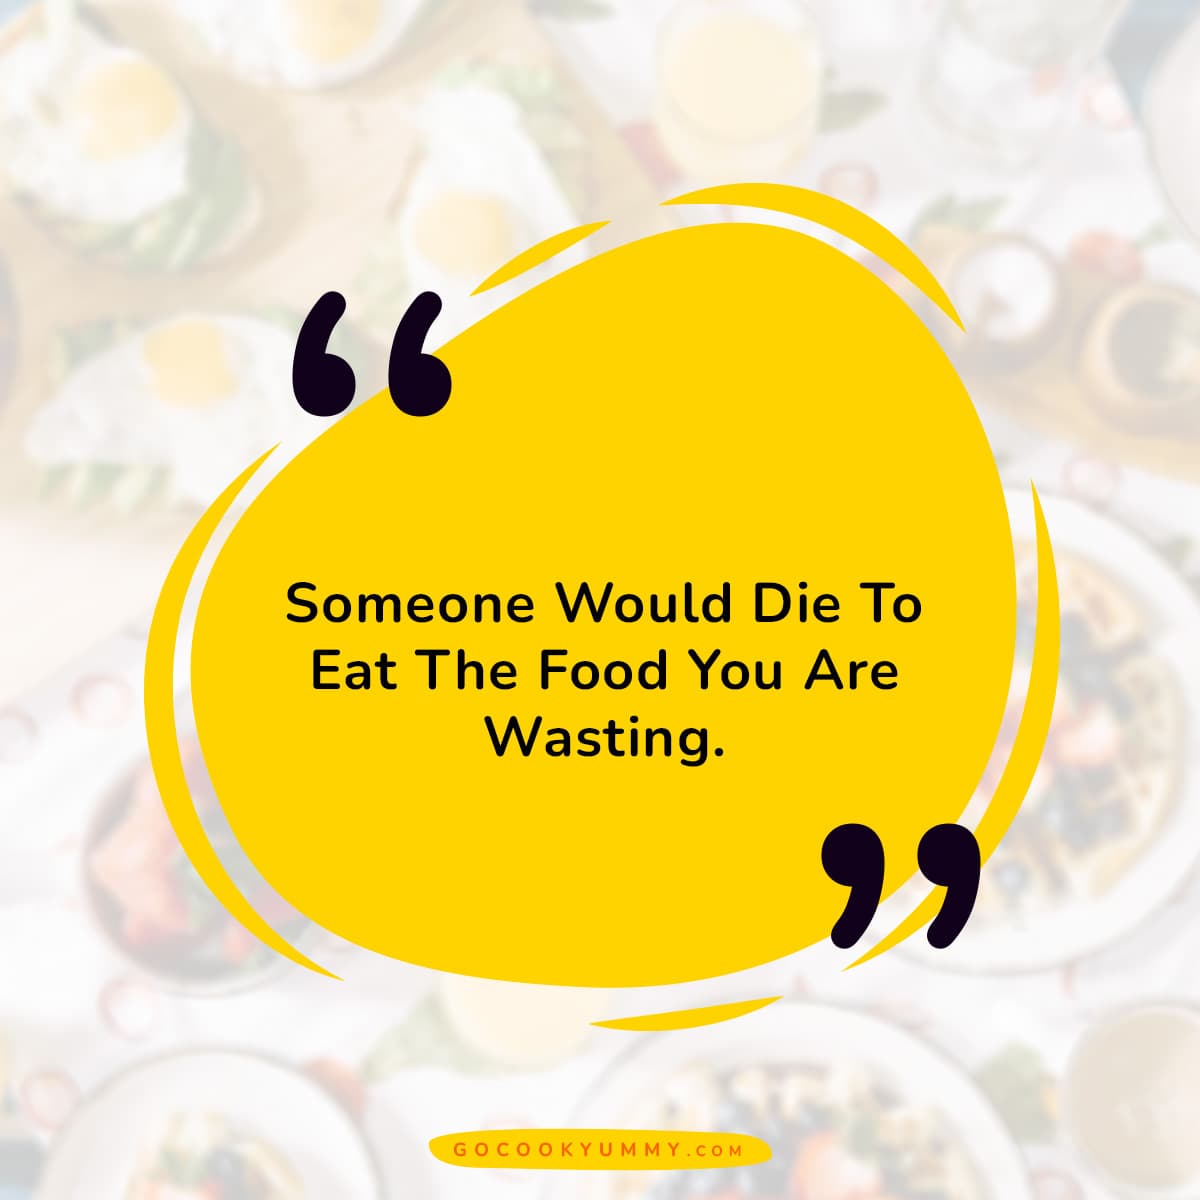 Someone would die to eat the food you are wasting.